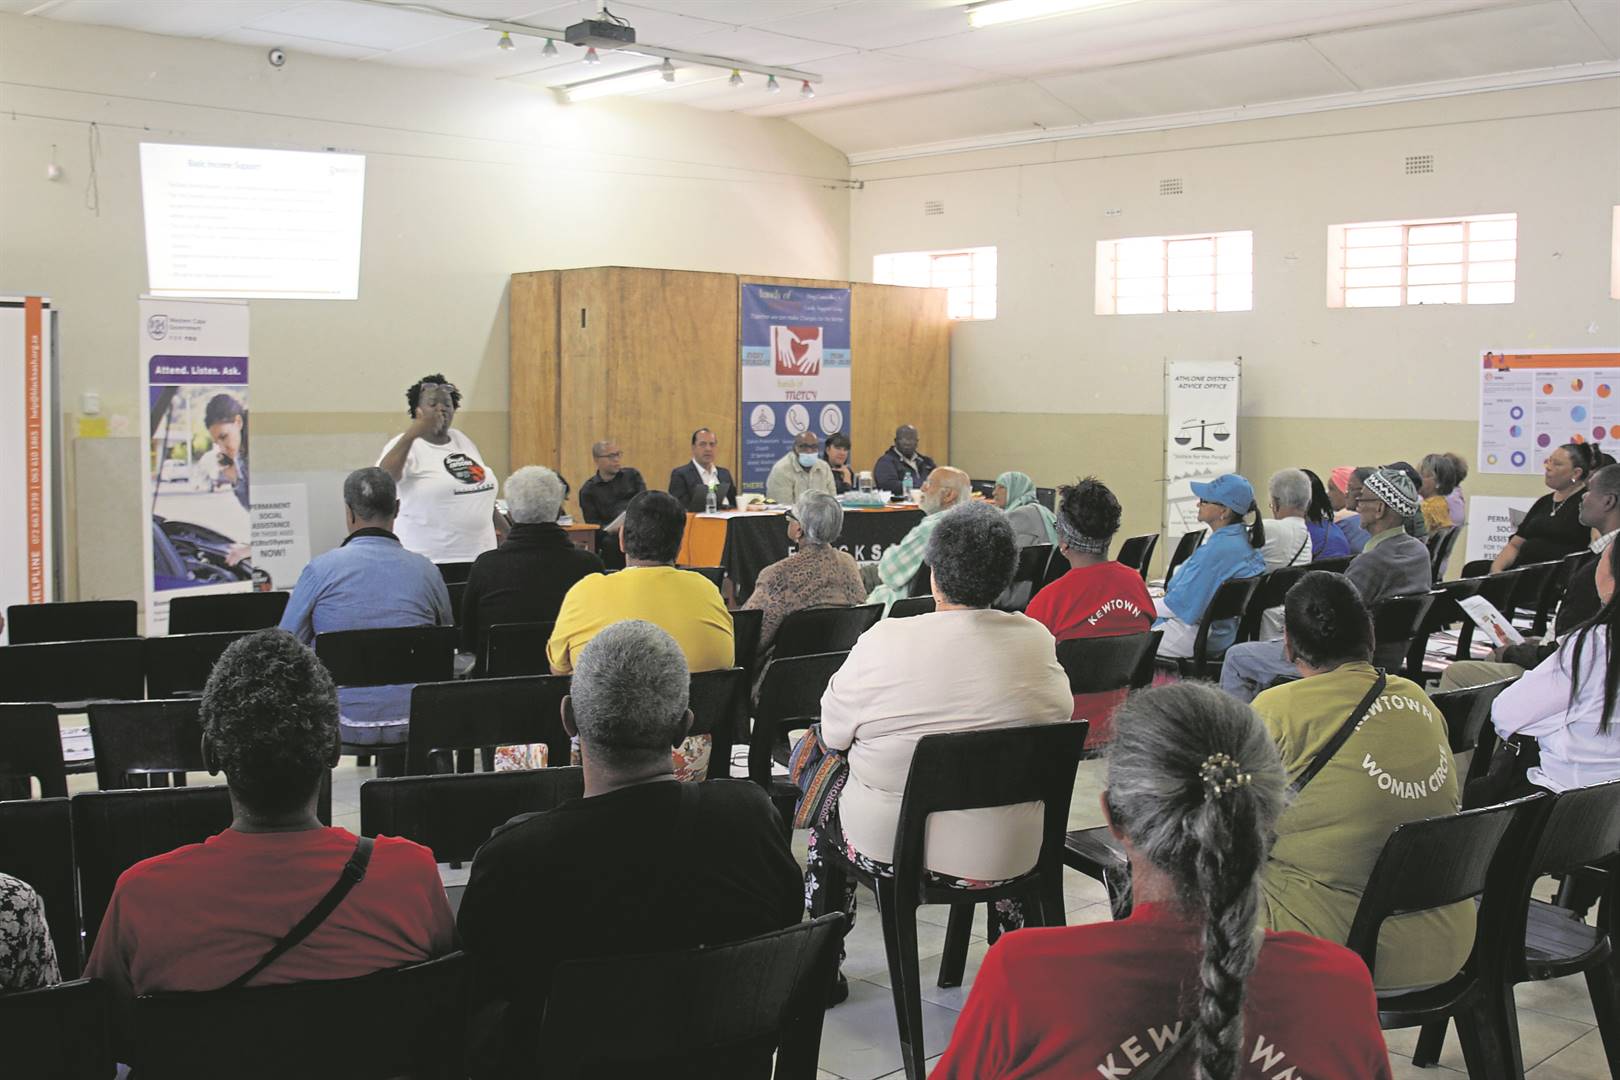 The community diaolgue created an opportunity for concerns around Sassa grants to be raised and discussed.PHOTO: Samantha lee-jacobs